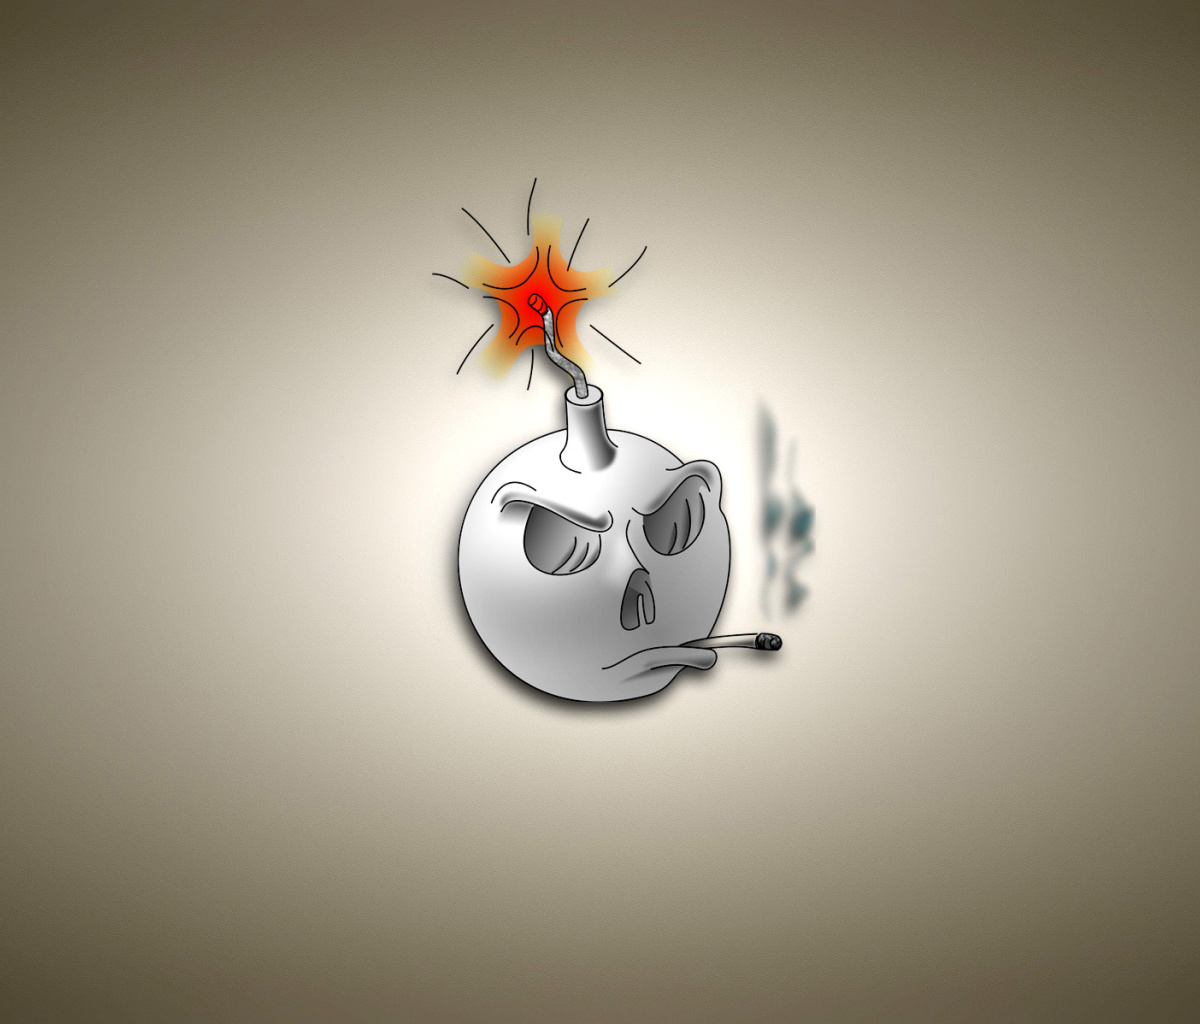 Bomb with Wick wallpaper 1200x1024